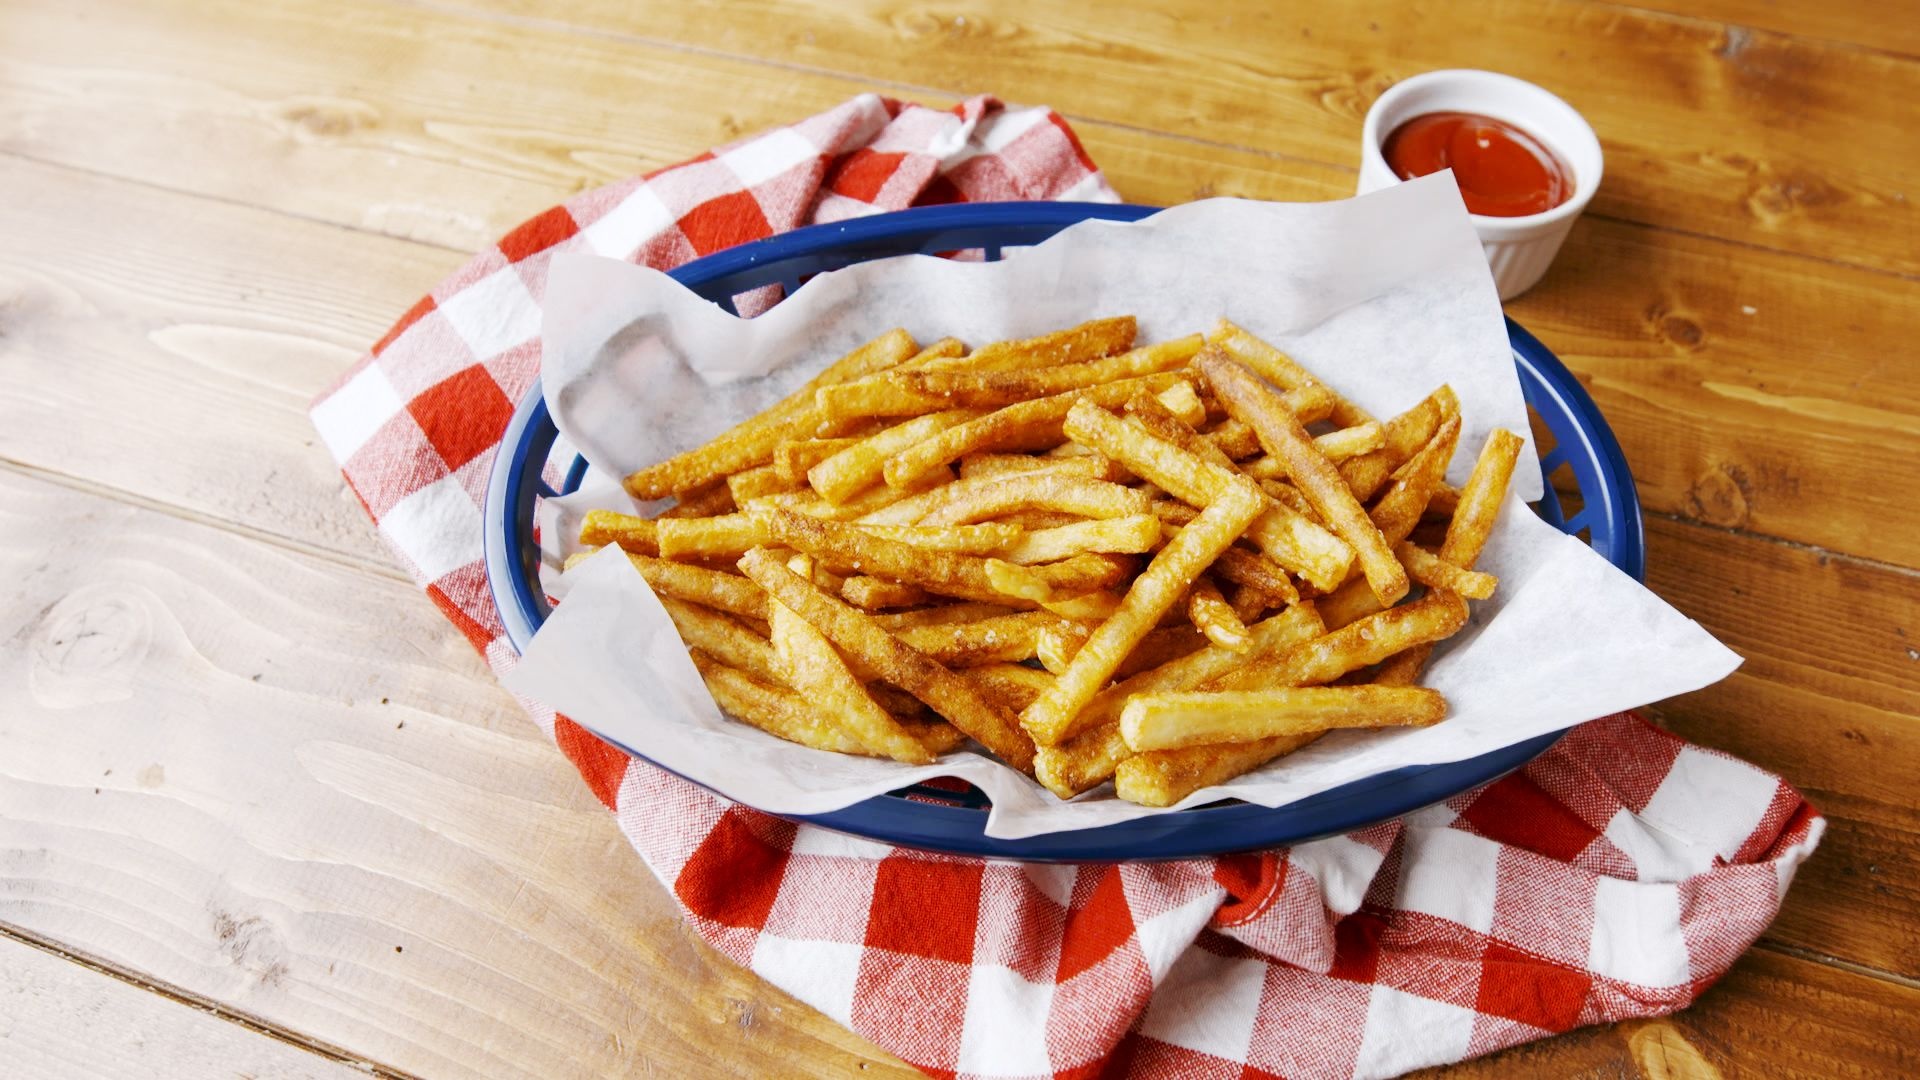 French Fries: Commonly enjoyed as a snack with a variety of dipping sauces. 1920x1080 Full HD Background.